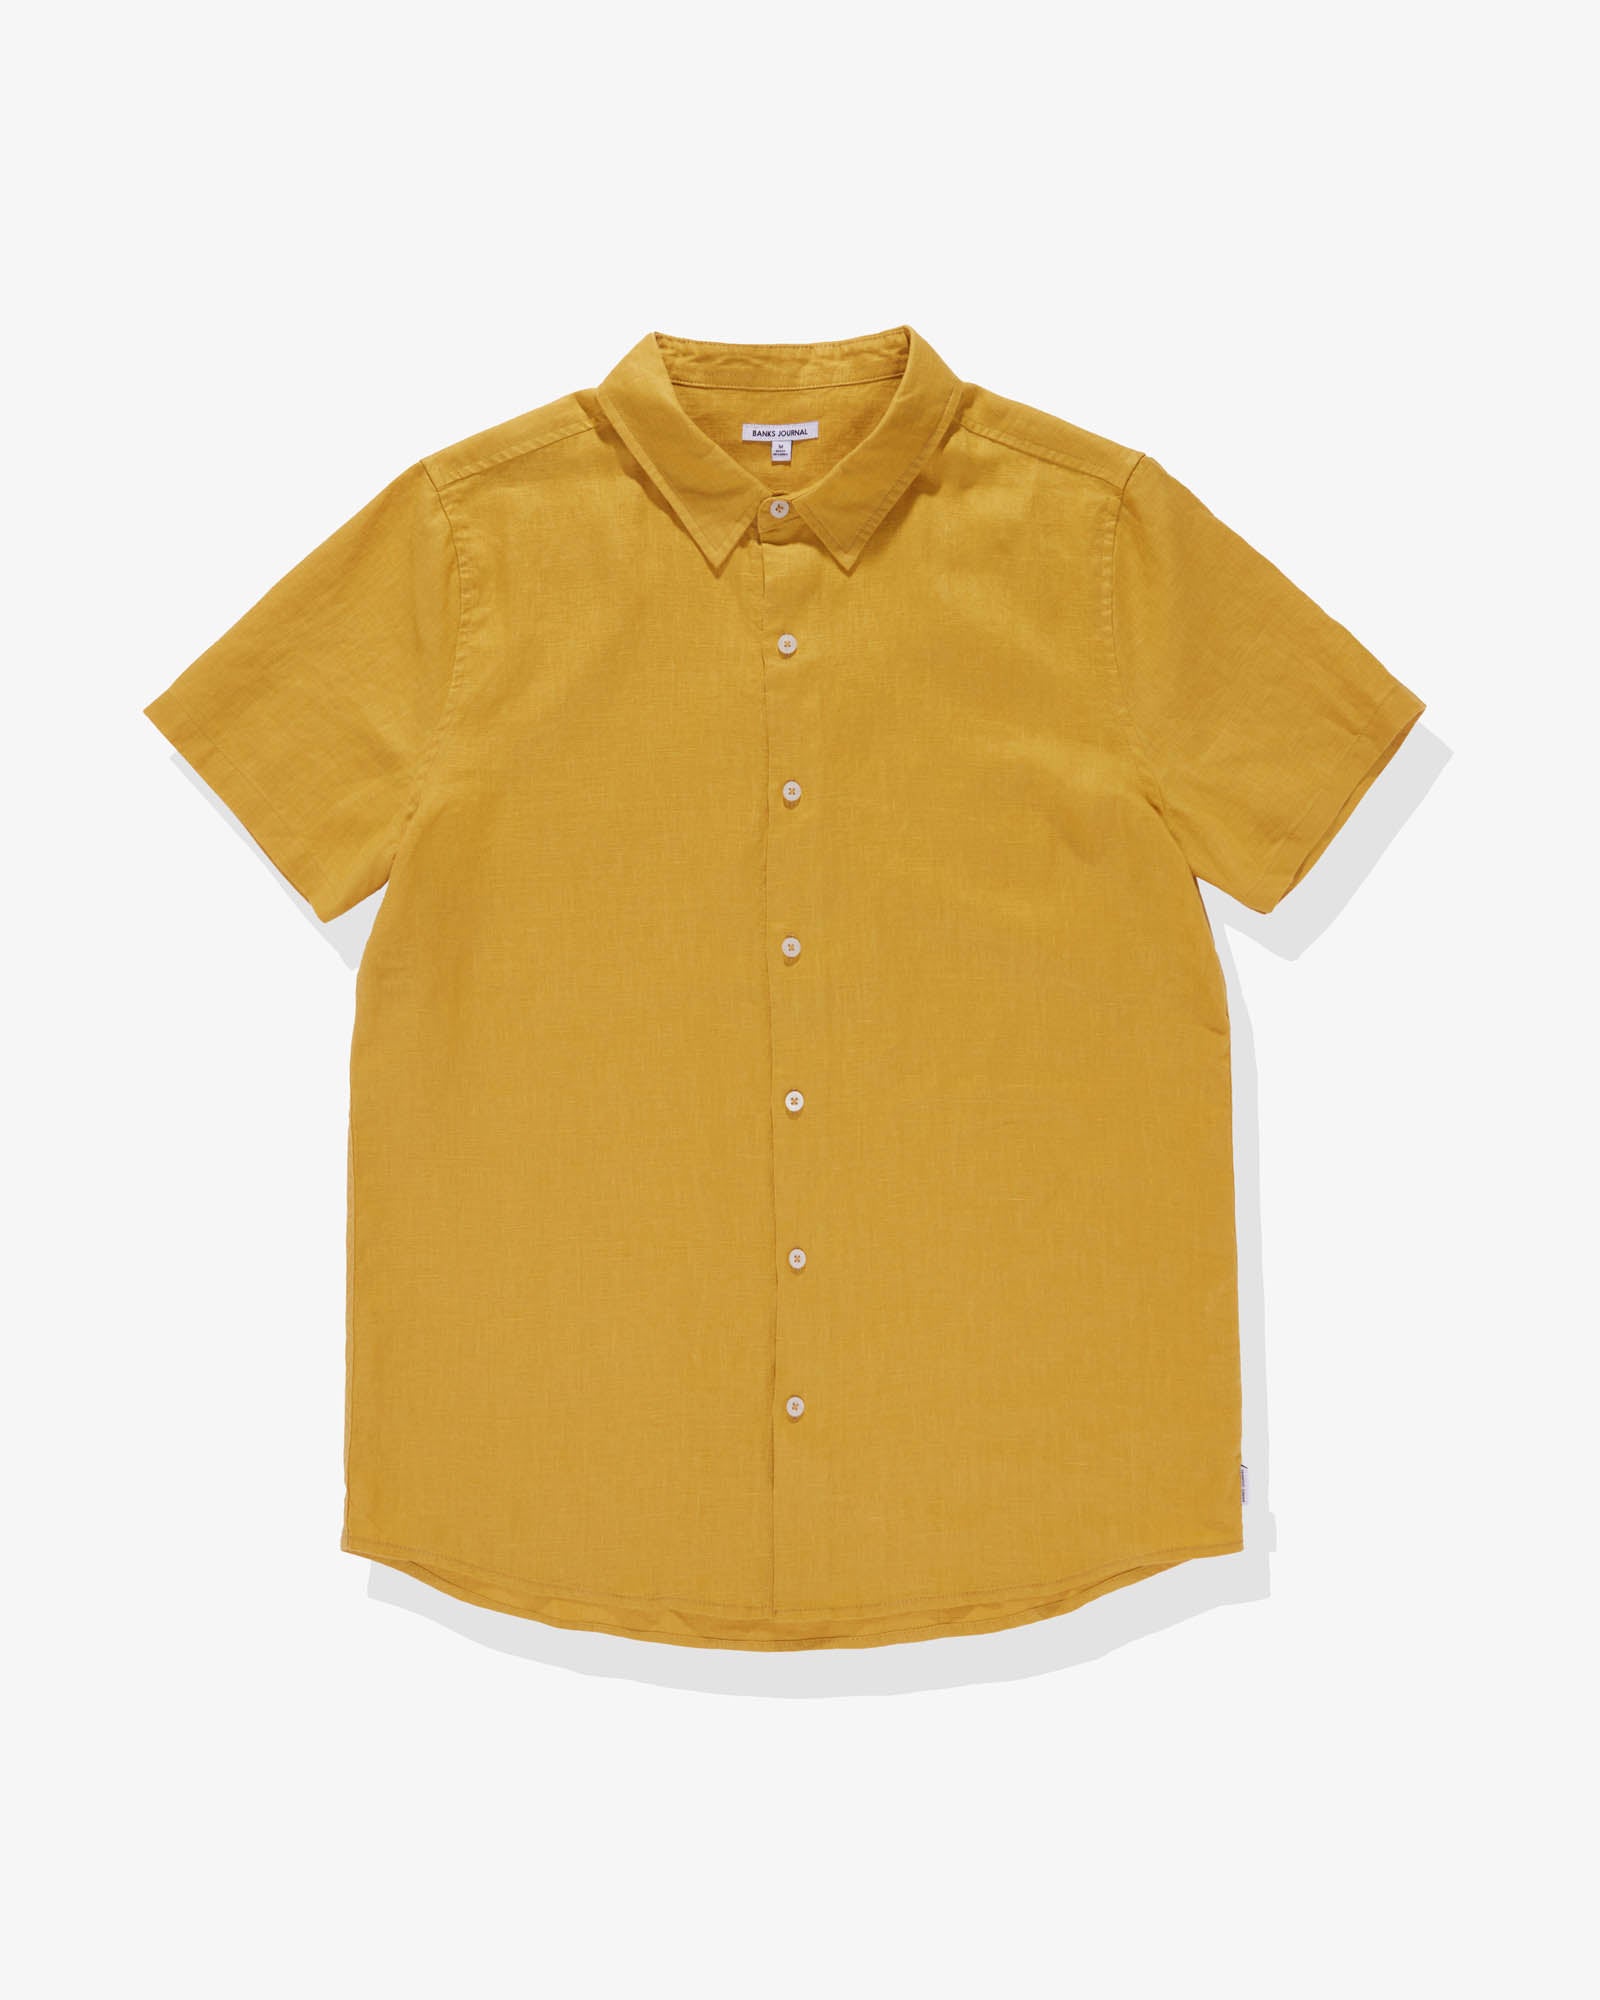 Hastings S/S Woven Shirt